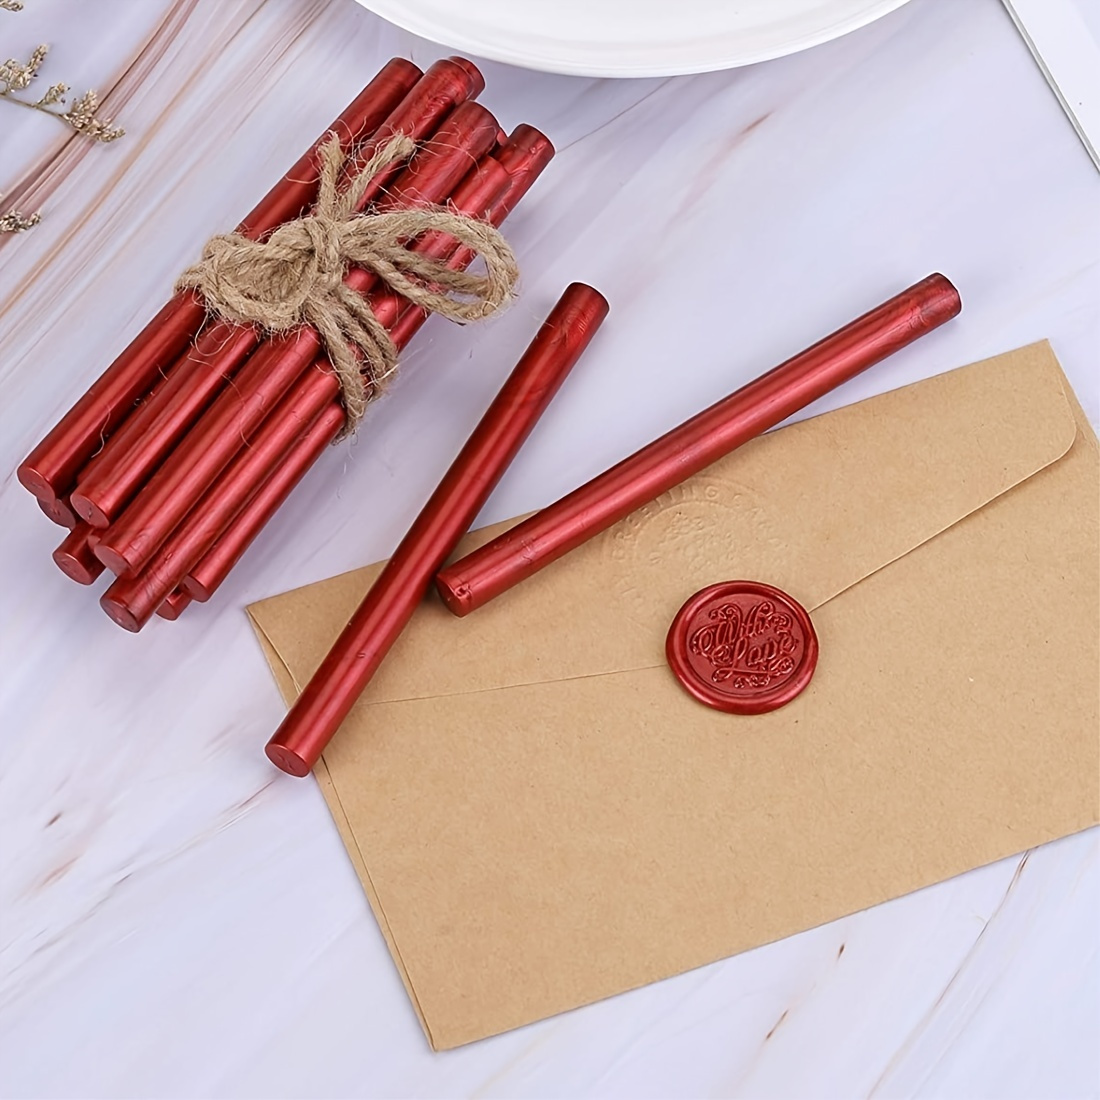  40 Pcs Glue Gun Sealing Wax Sticks for Wax Seal Stamp, Sealing  Glue Gun Sealing Wax Sticks Mini Glue Stick, Great for Wedding  Invitations,Christmas Gift : Arts, Crafts & Sewing